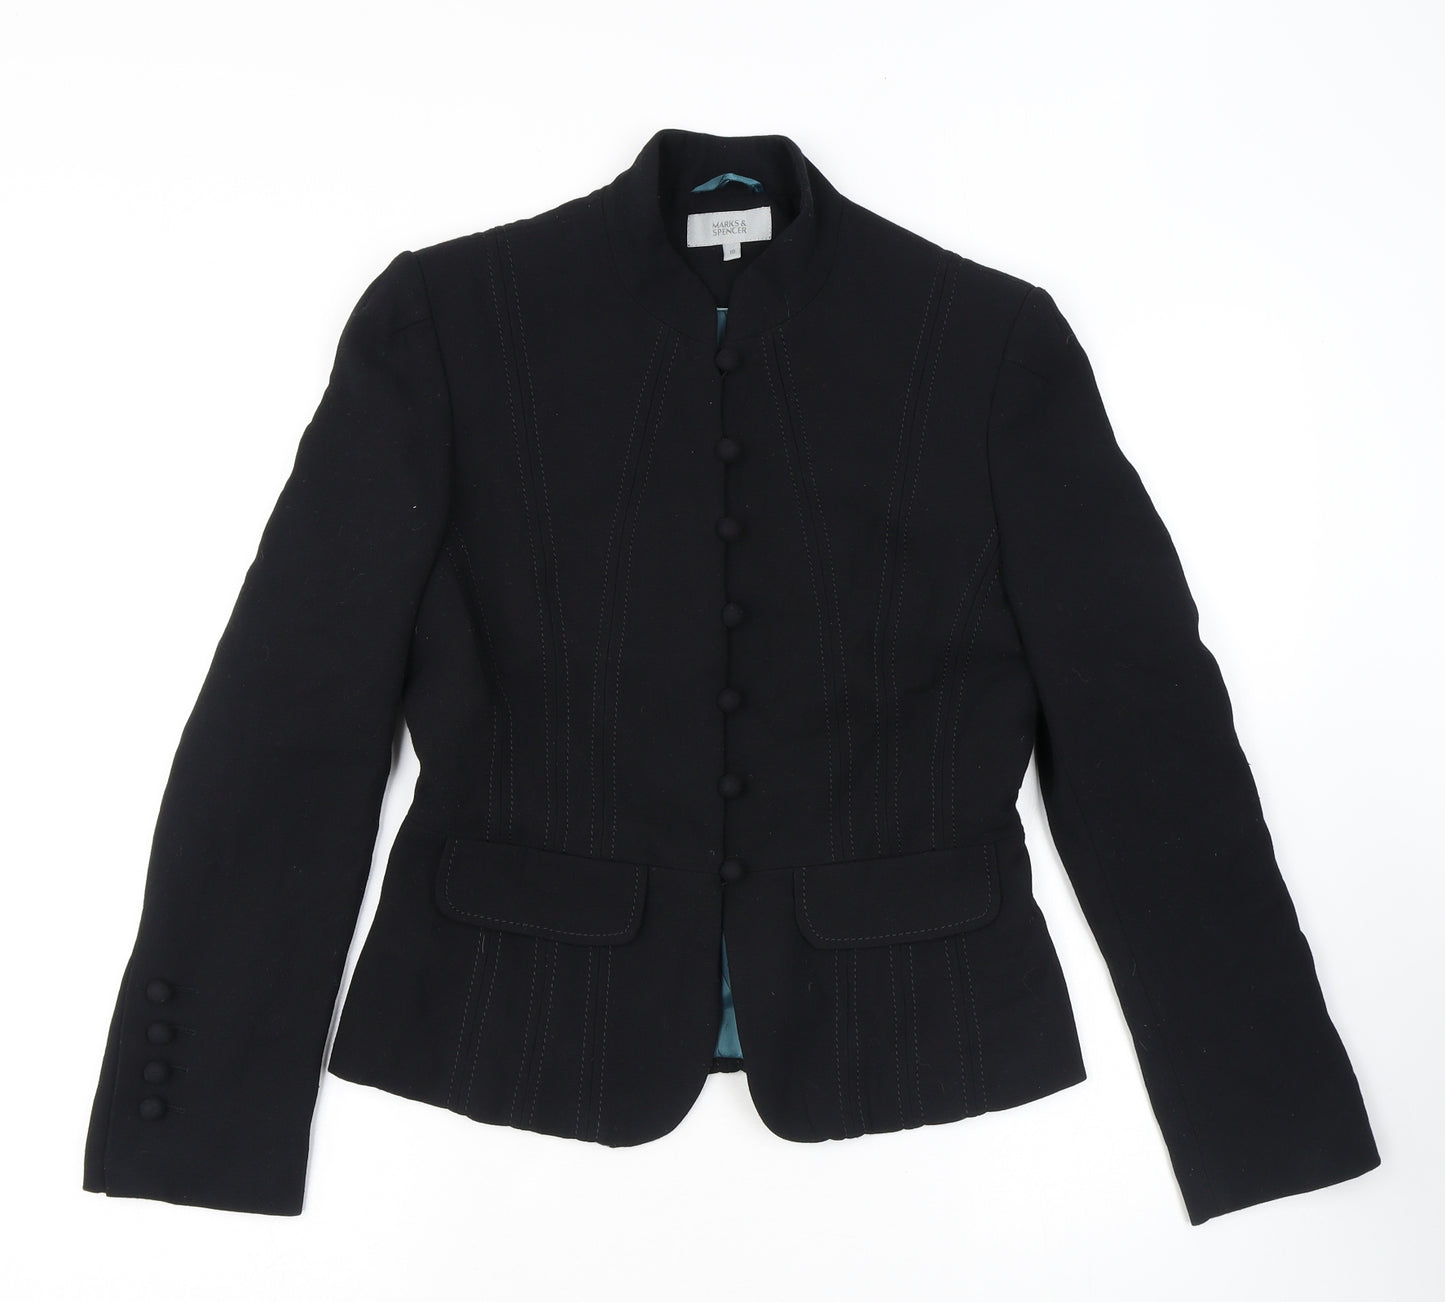 Marks and Spencer Womens Black Polka Dot Polyester Jacket Suit Jacket Size 12 - 7 Button Front